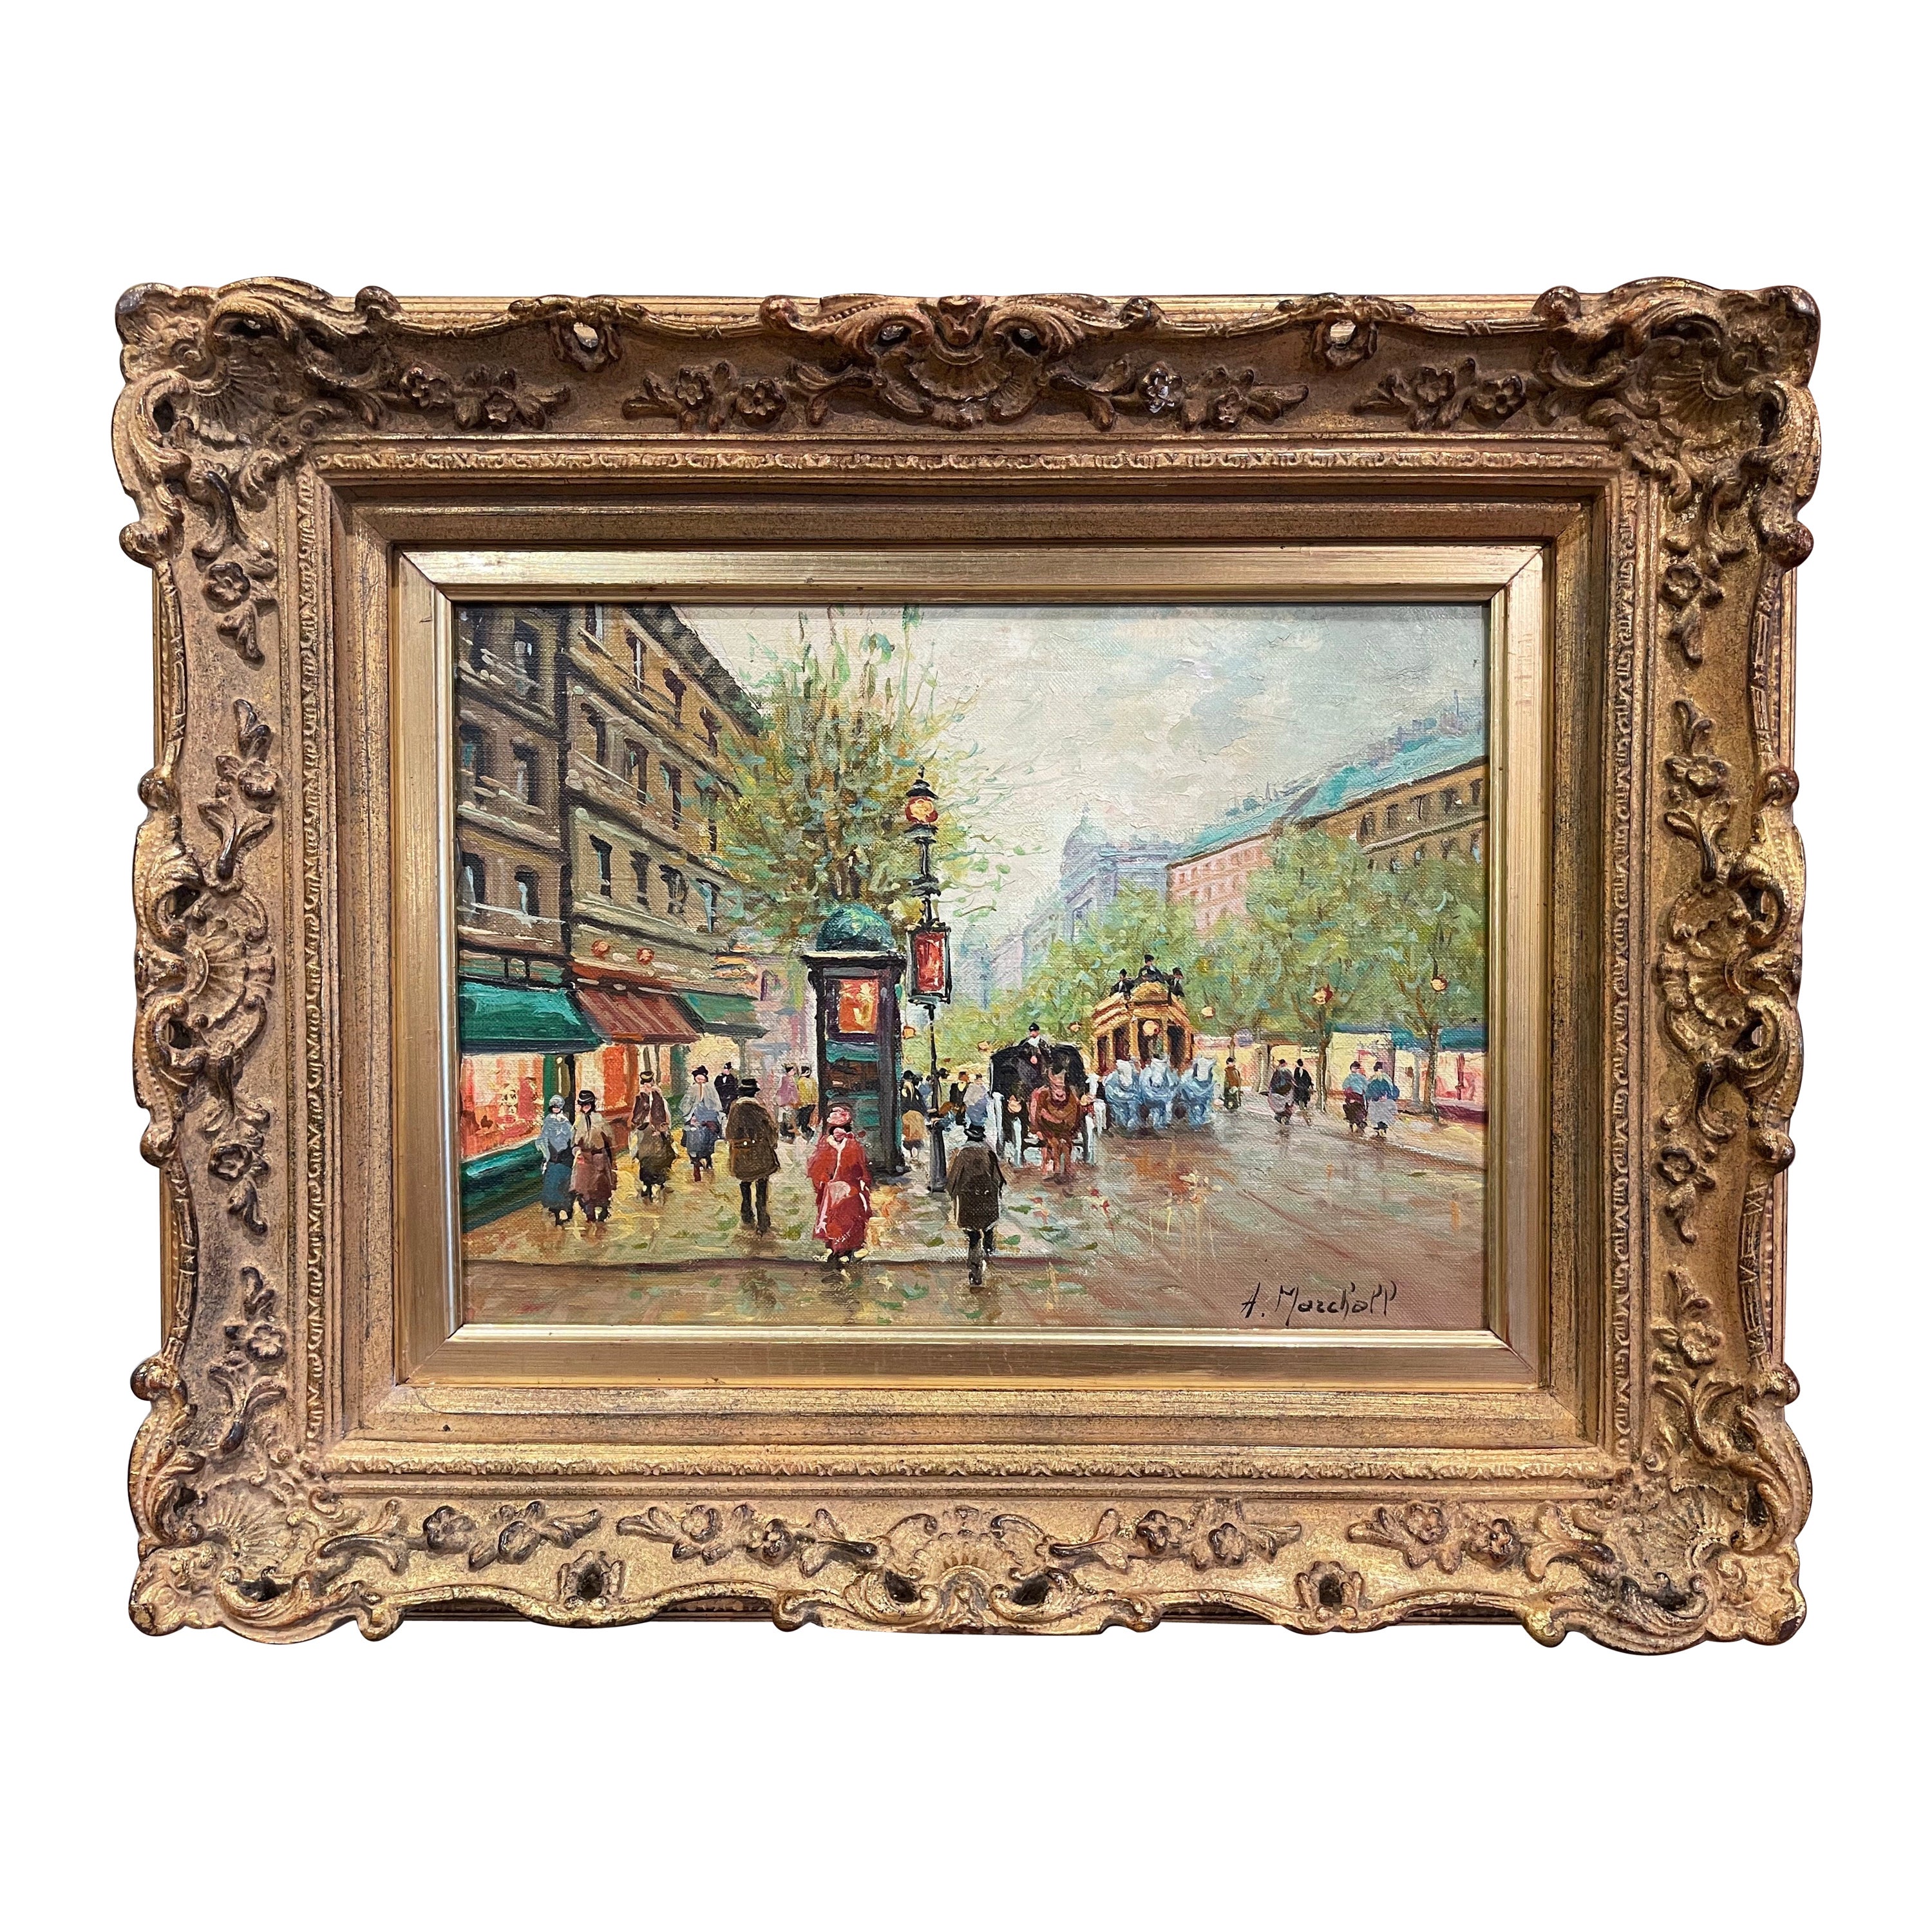 Midcentury Parisian Street Oil Painting in Carved Gilt Frame Signed a. Marchall